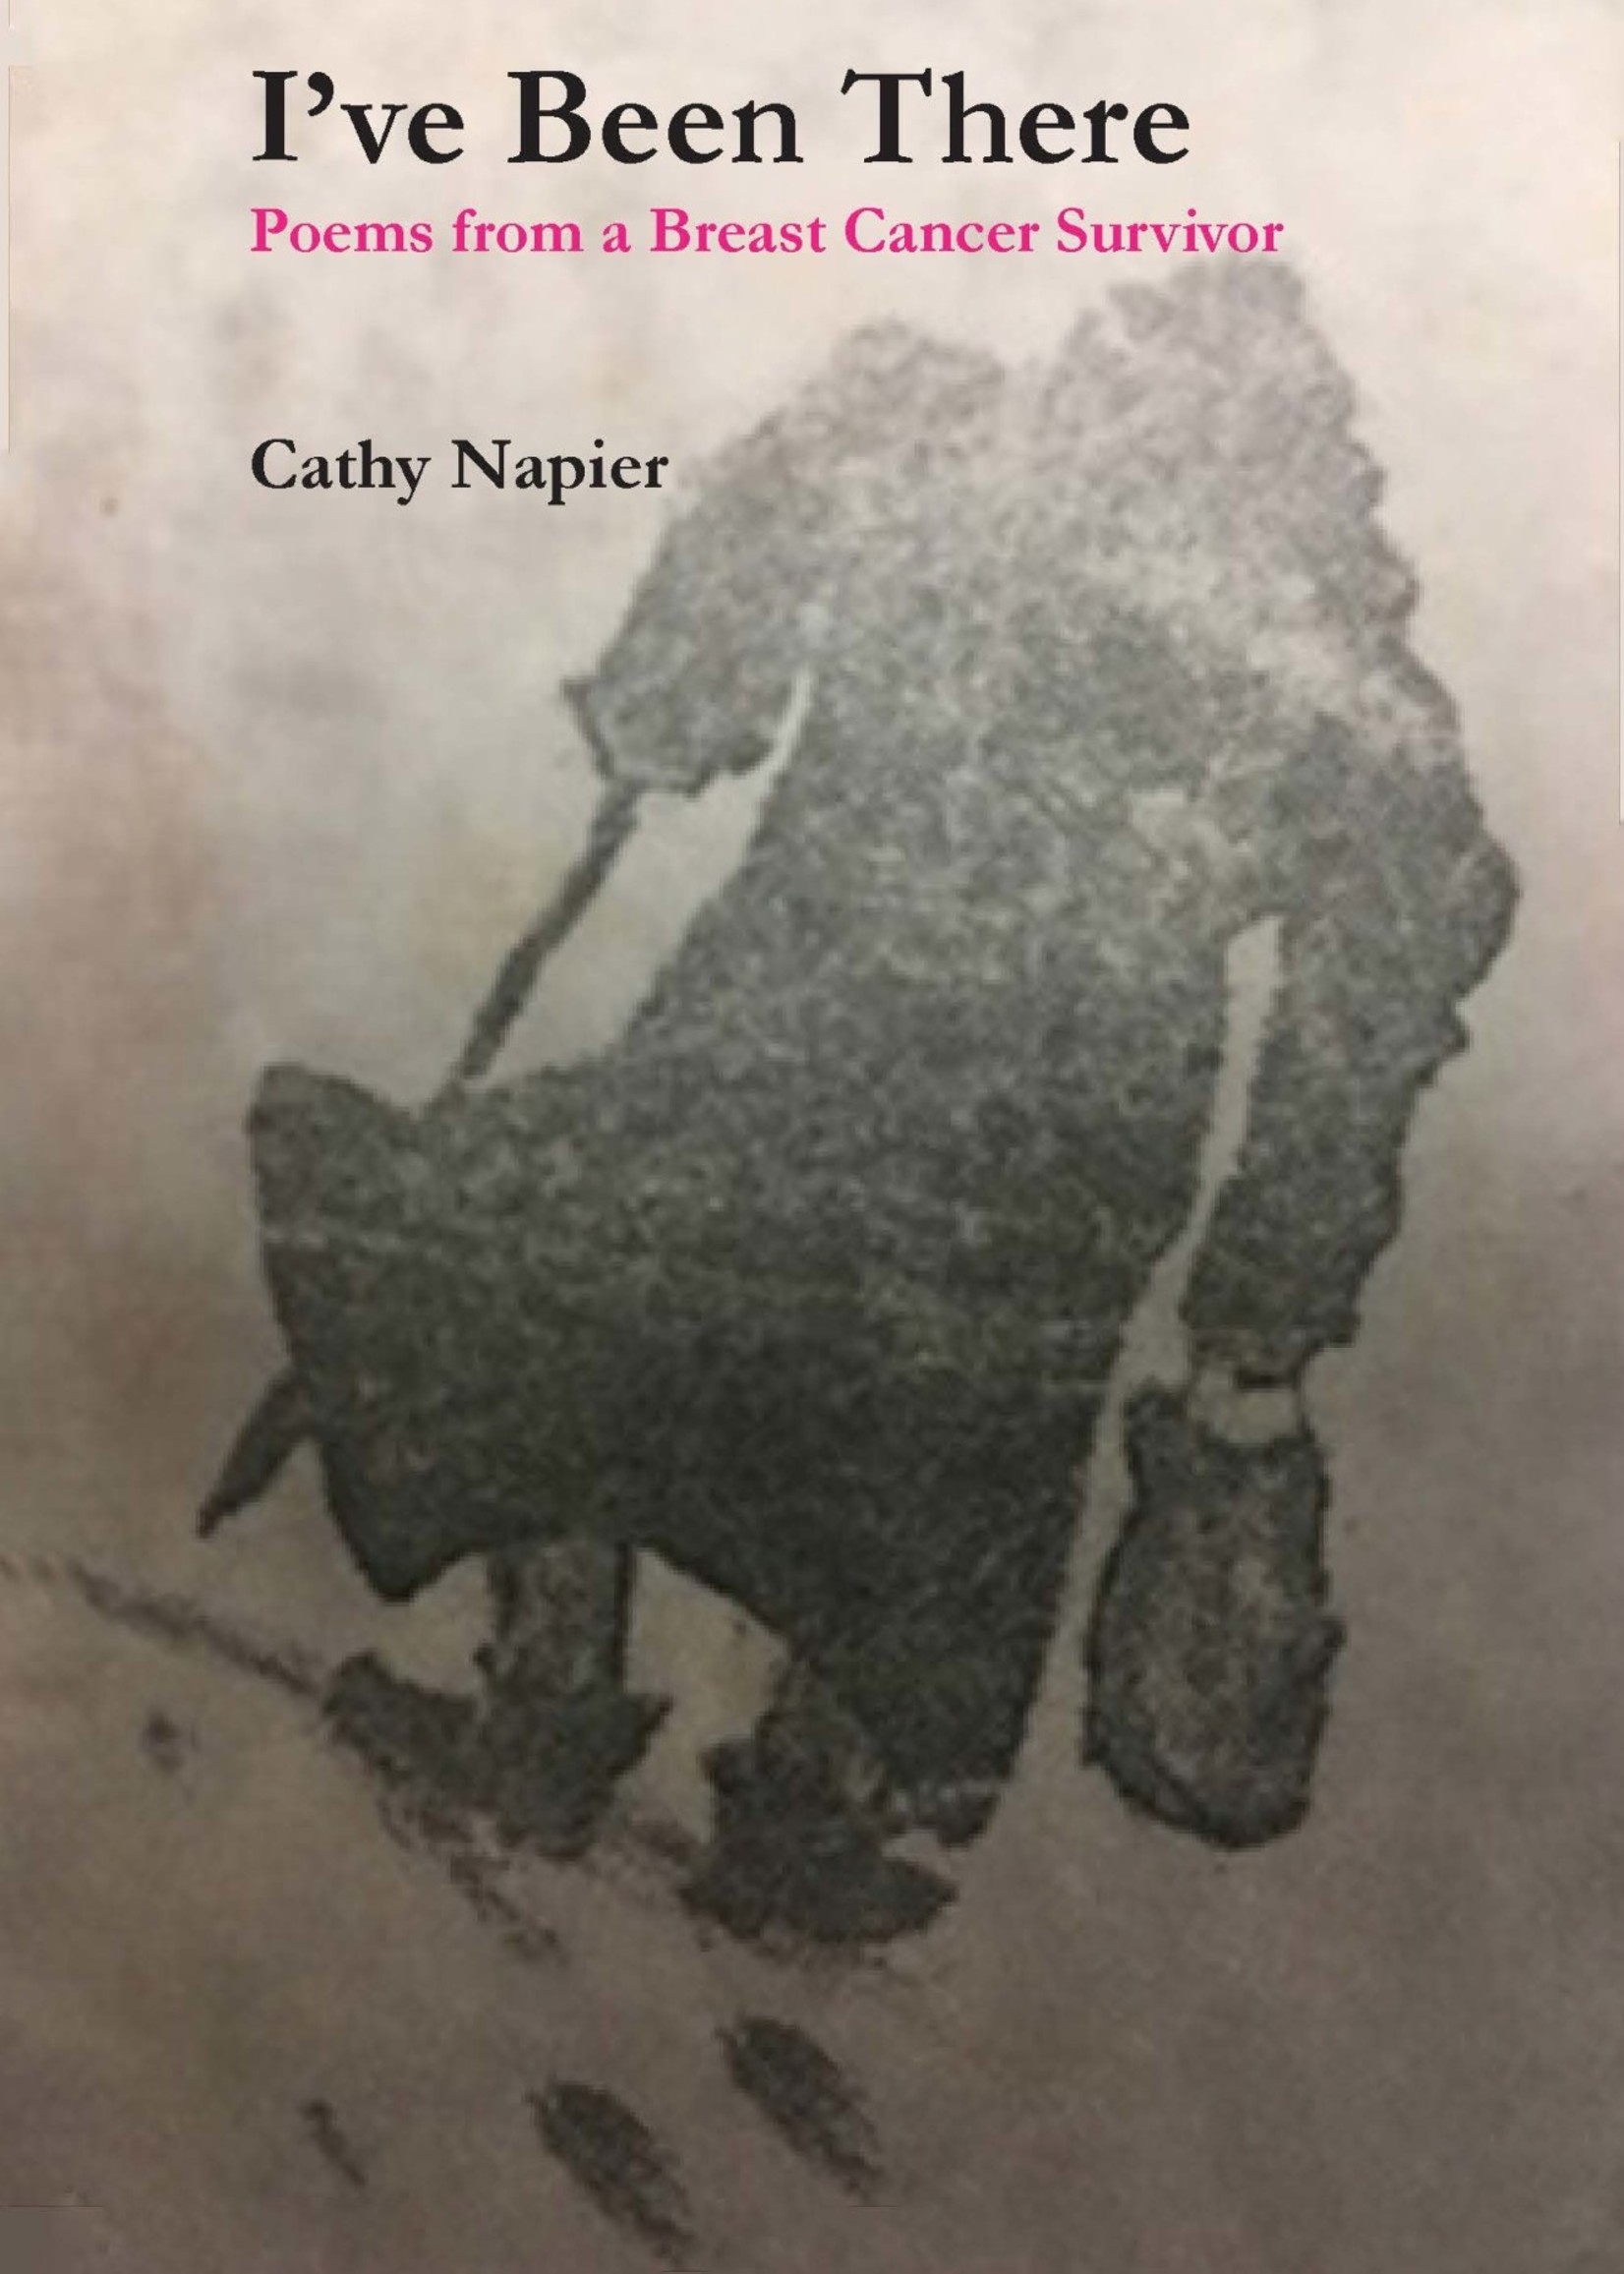 I've Been There: Poems From a Breast Cancer Survivor by Cathy Napier